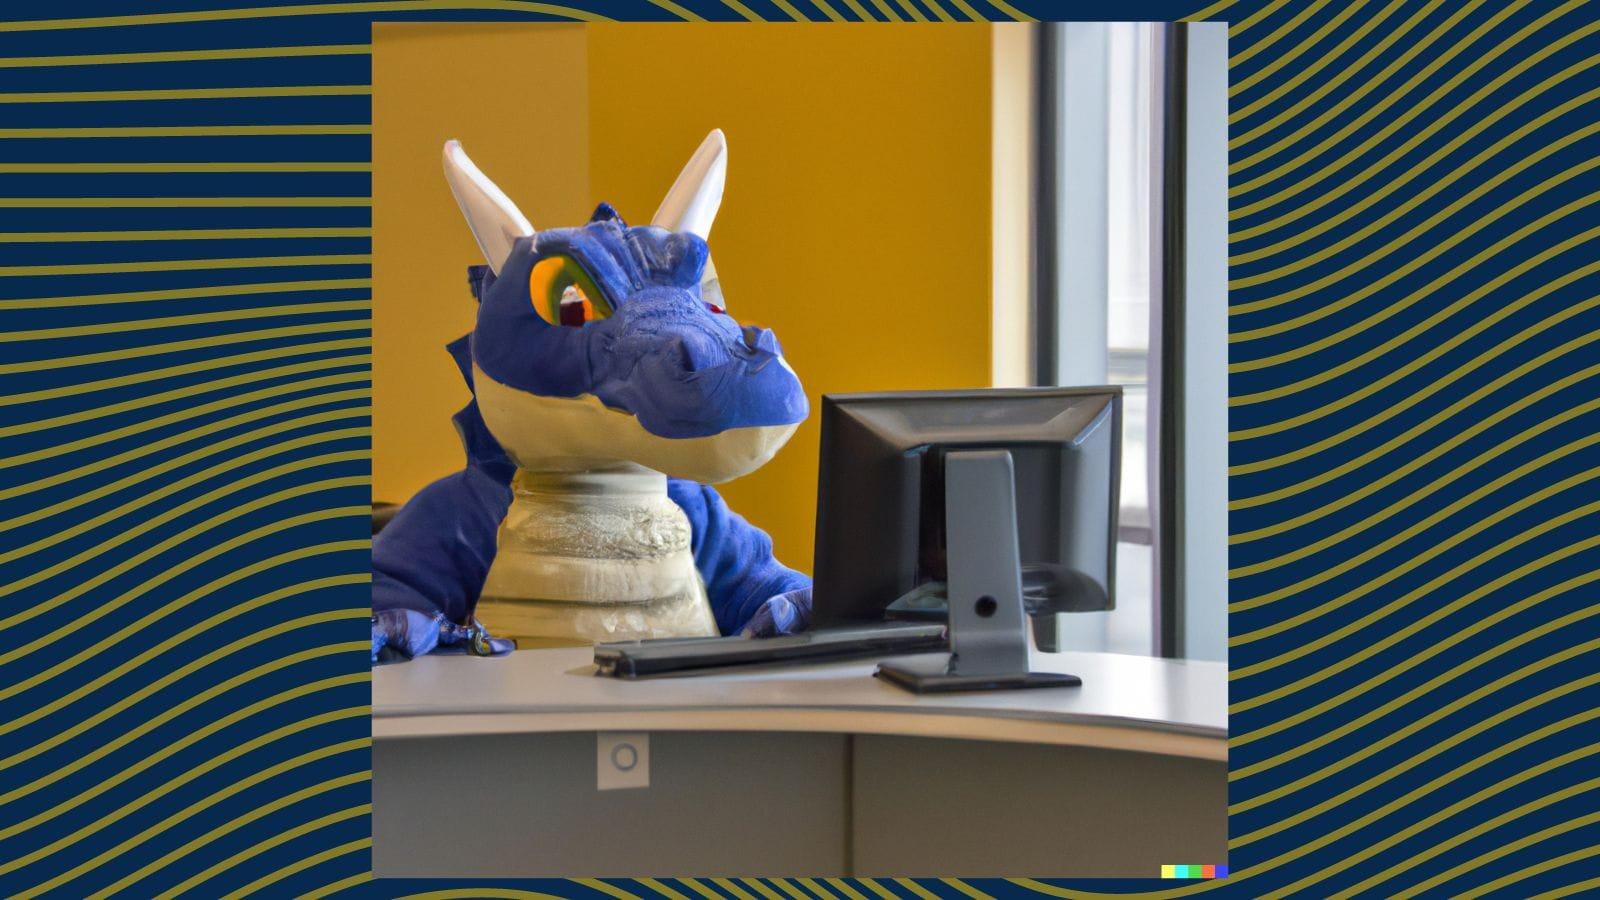 AI image created by DALL.E using the prompt &quot;Drexel University Mario the Dragon doing homework on a computer&quot;